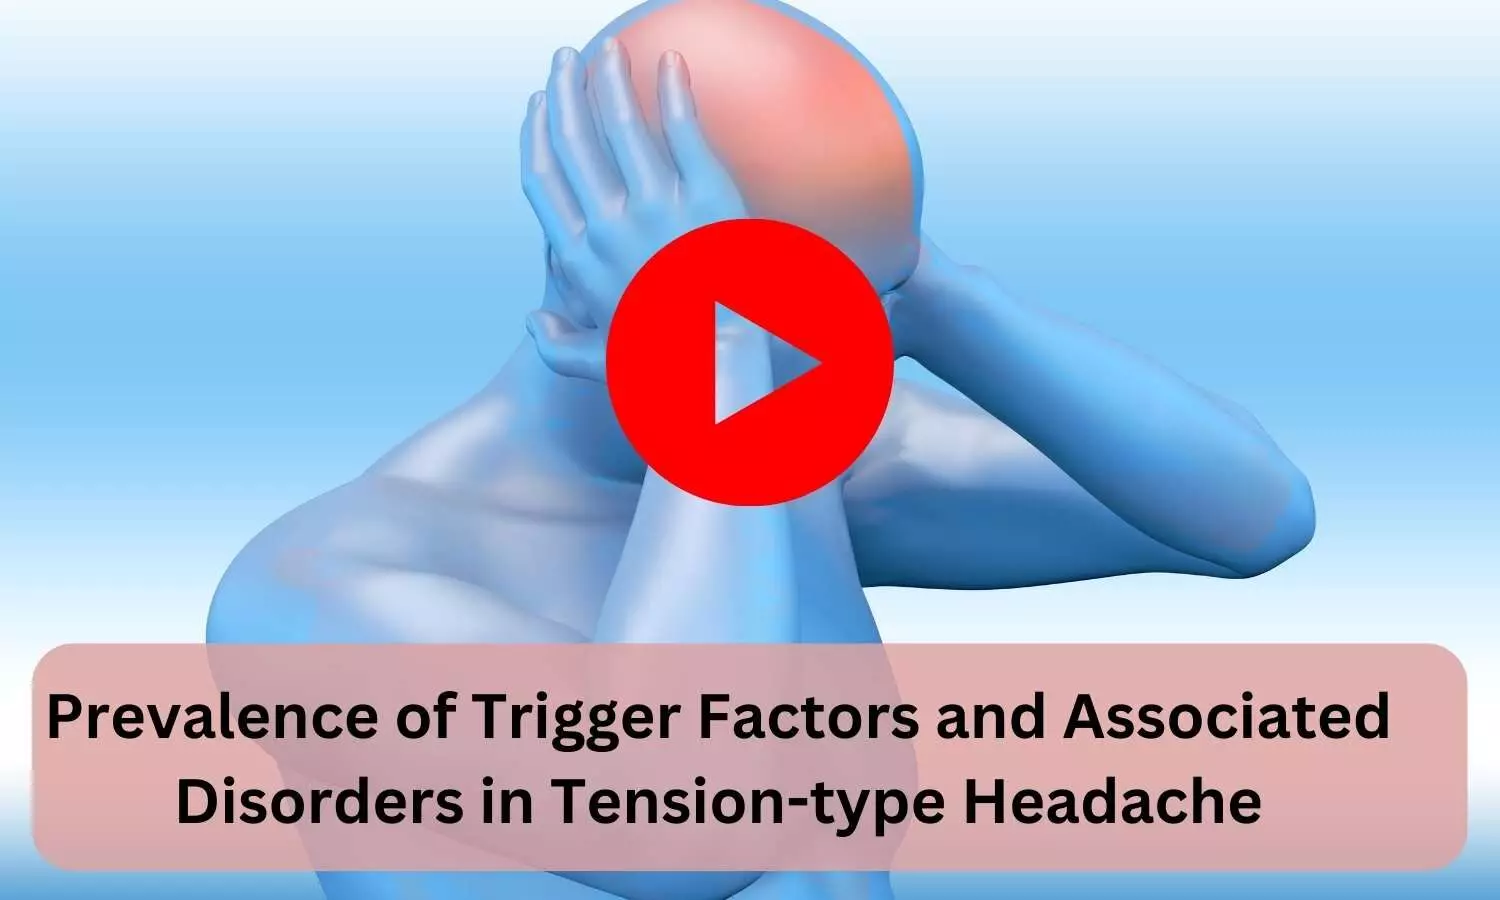 Prevalence of Trigger Factors and Associated Disorders in Tension-type Headache